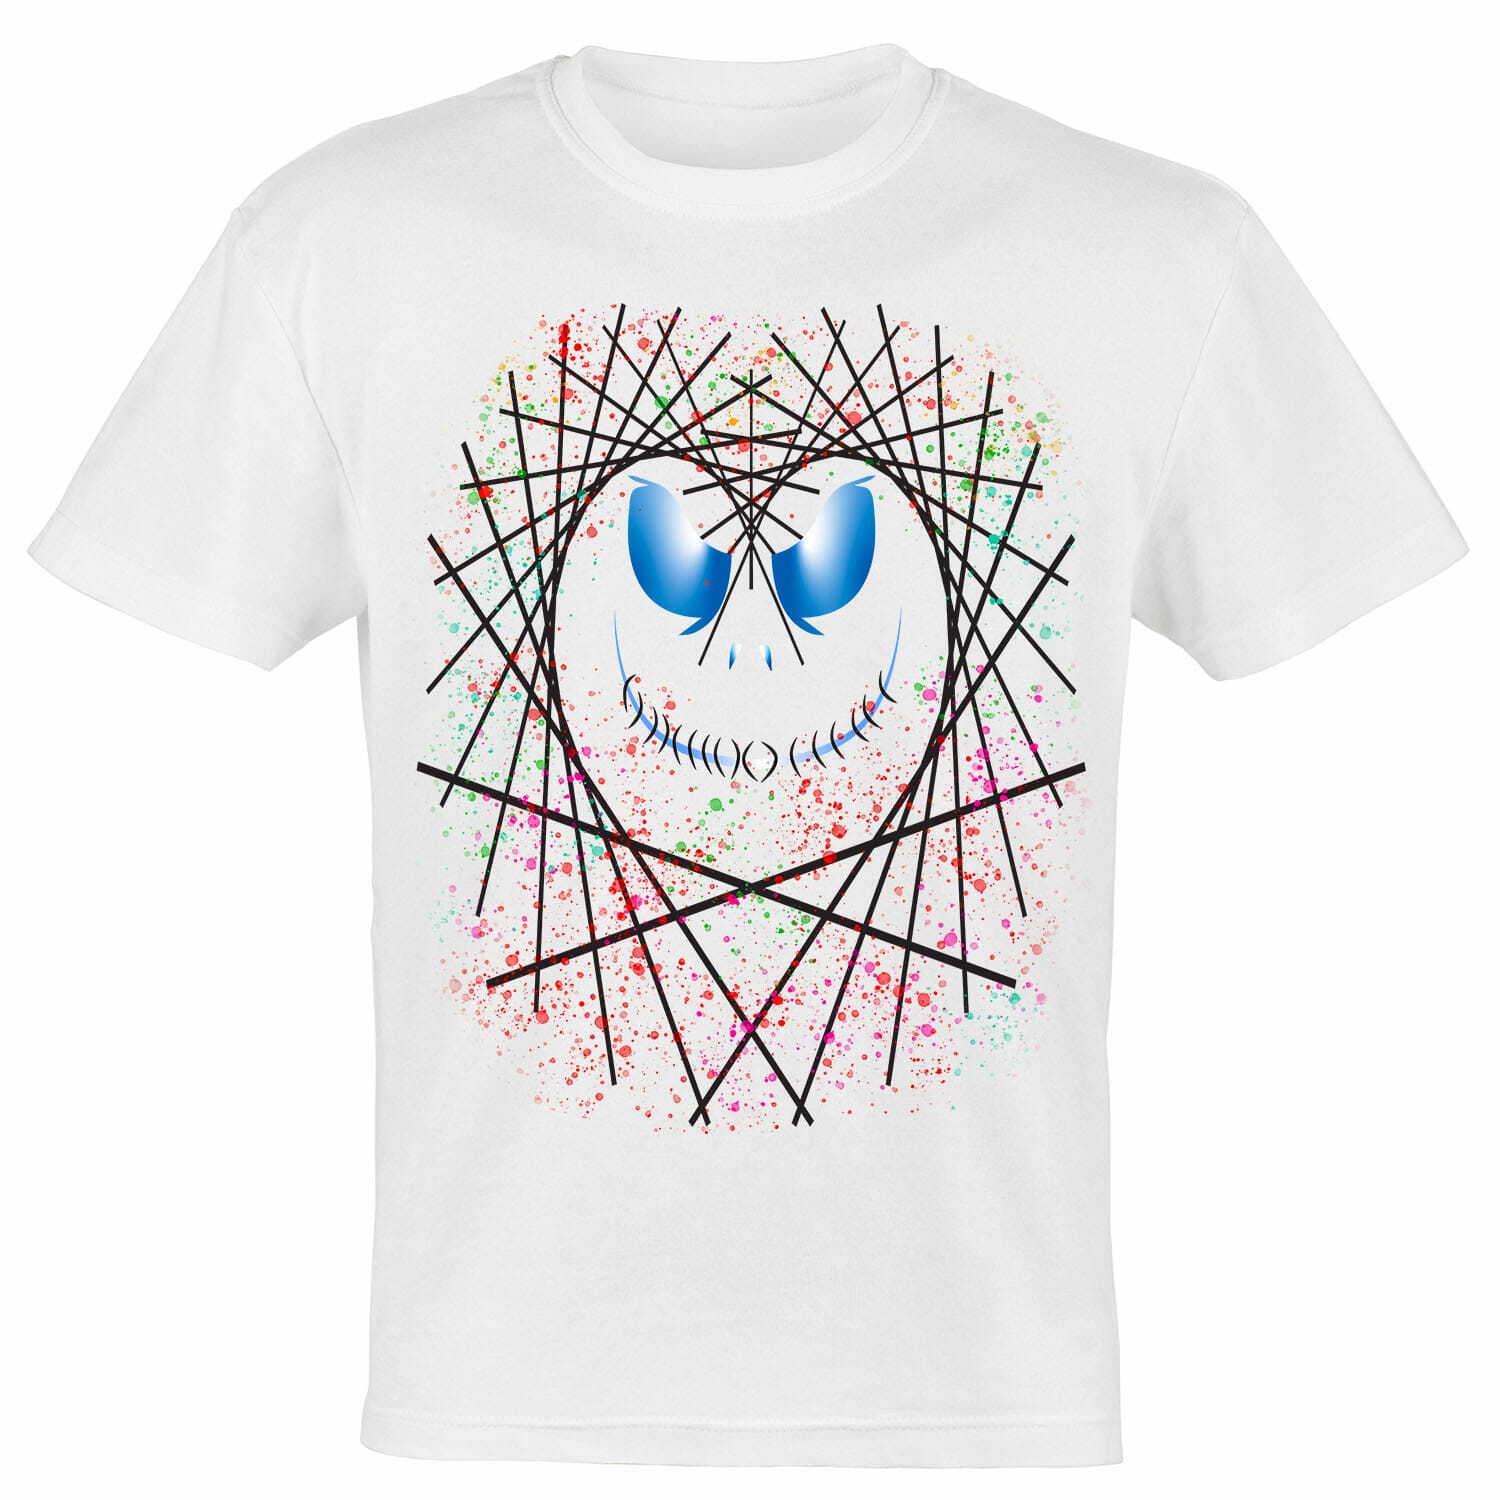 heart shaped abstract monster smile with splatter effect design